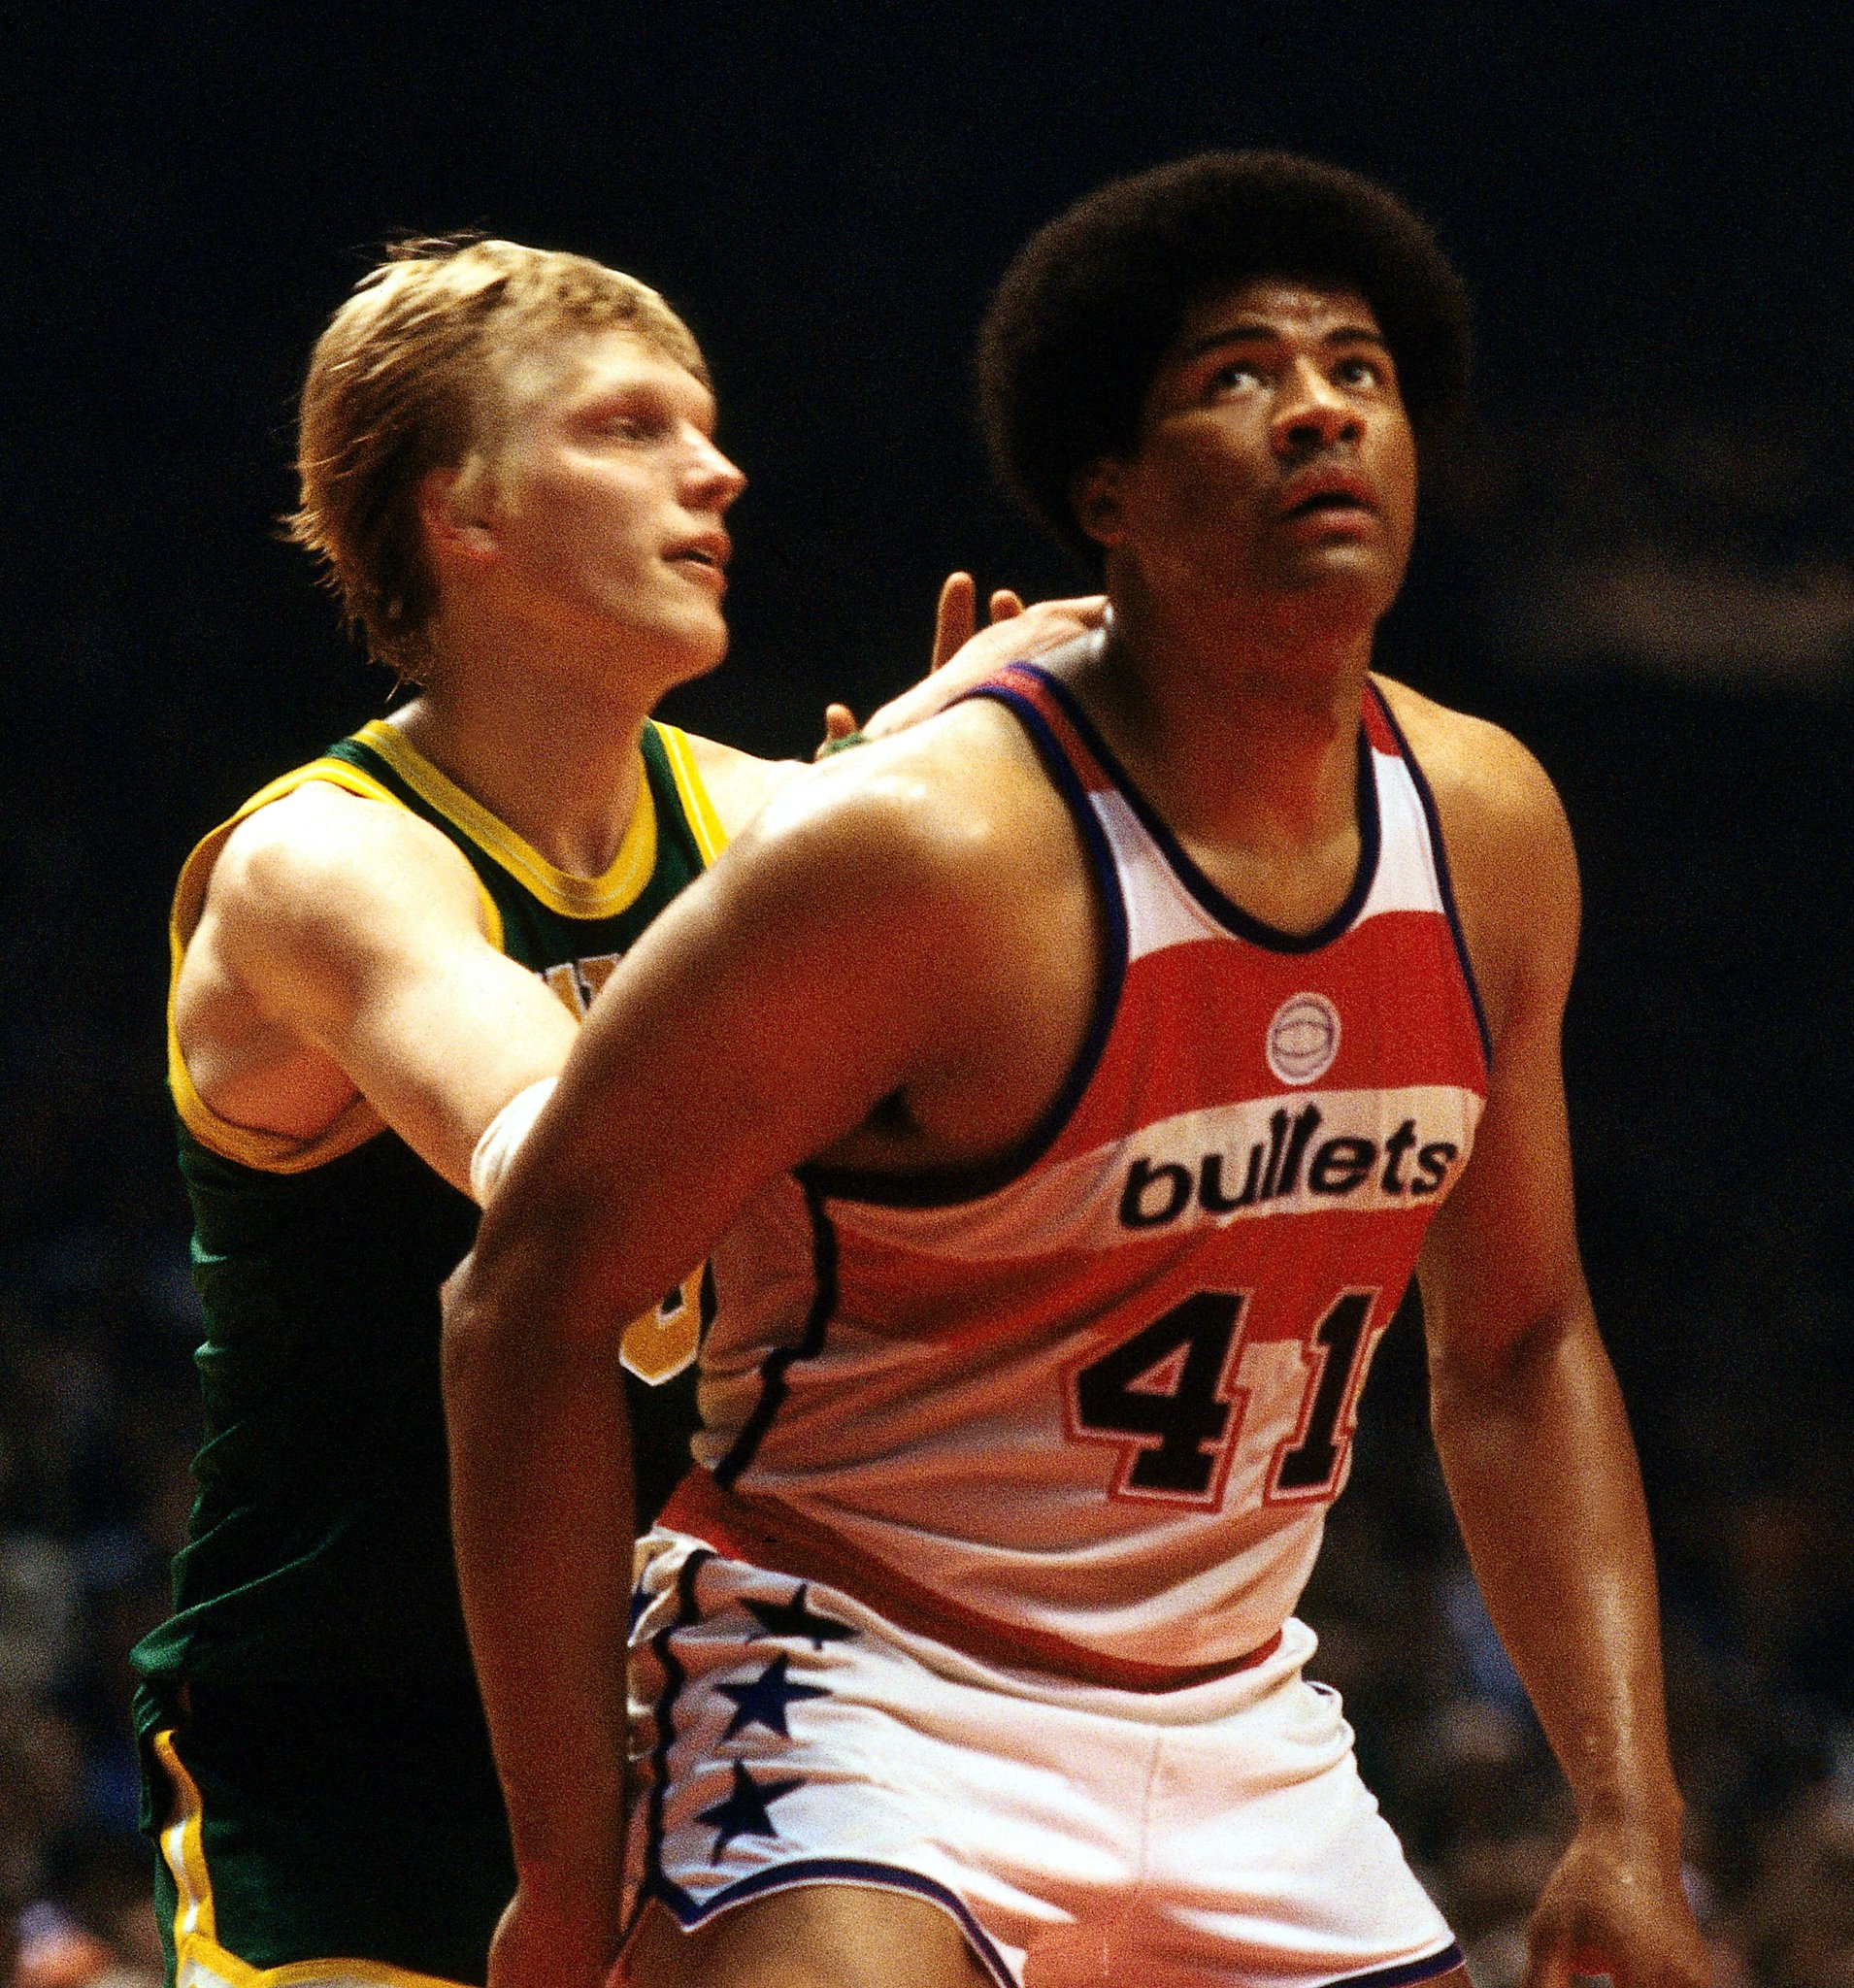 Happy birthday to a Bullets legend and Hall of Famer, Wes Unseld! Help us wish him well!    